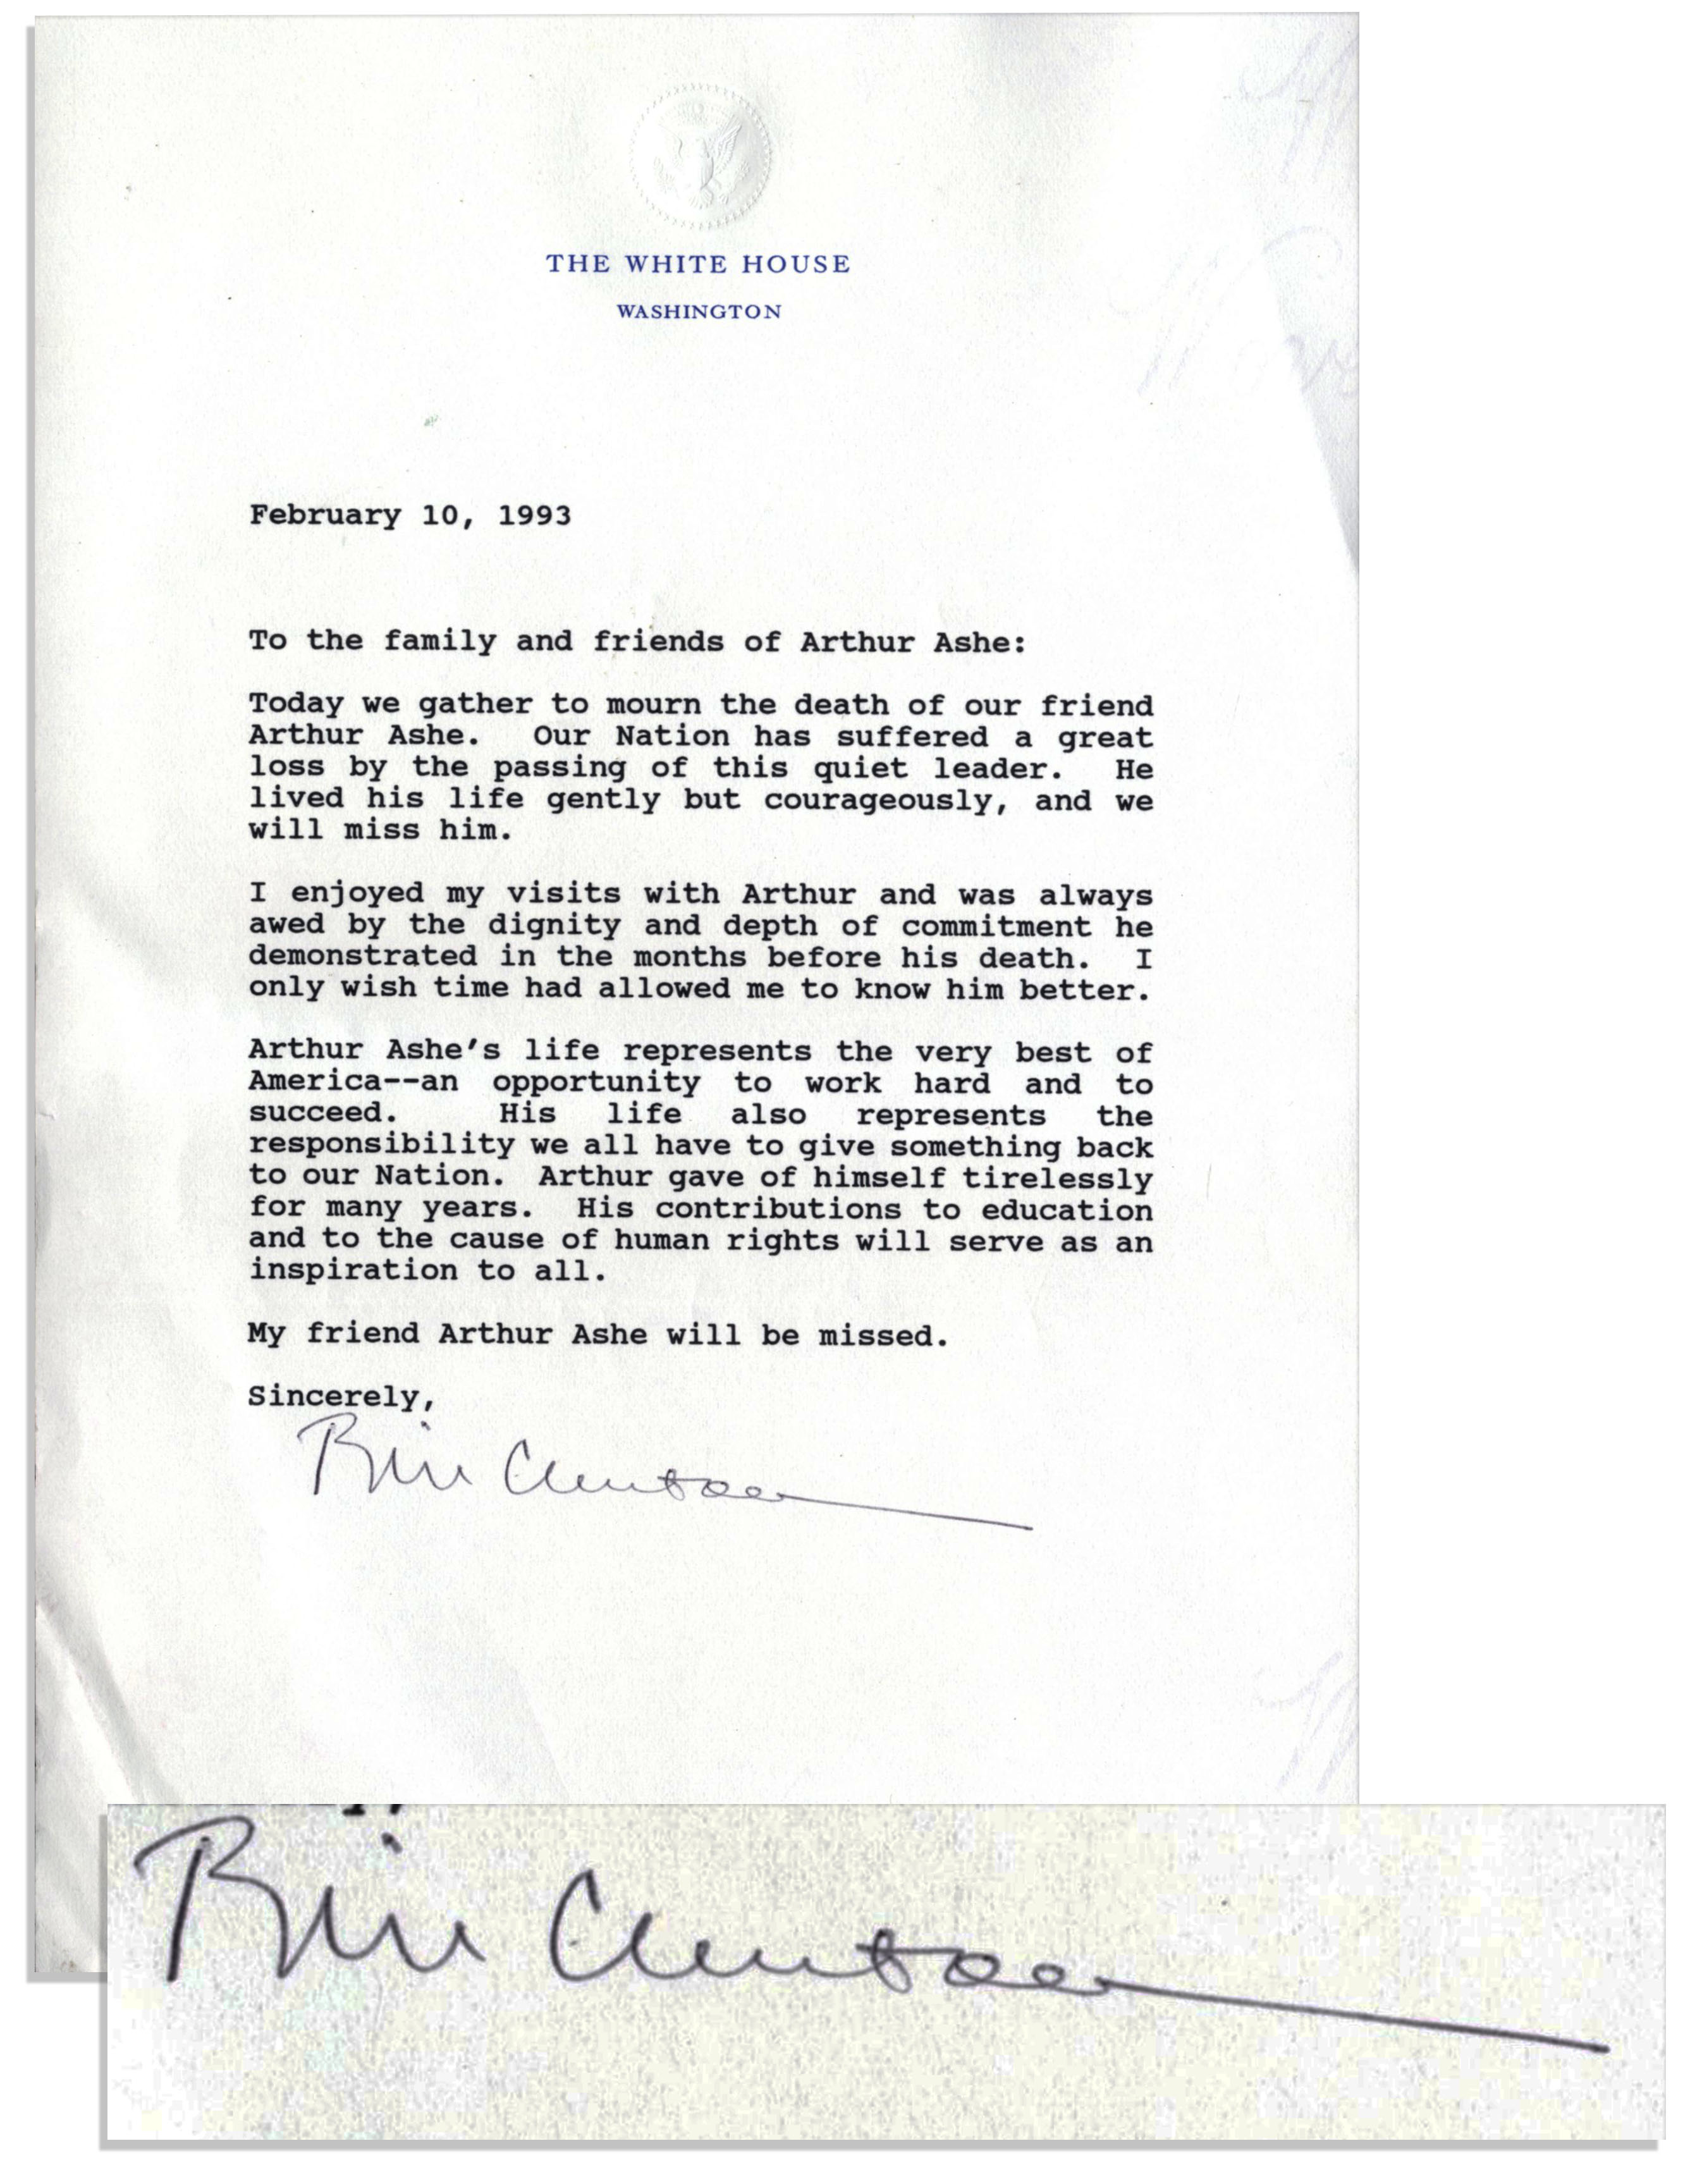 Bill Clinton Memorabilia Bill Clinton Typed Letter Signed on White House Stationery Offering Condolences to the Family of Arthur Ashe the Week He Passed Away -- ''...I enjoyed my visits with Arthur...''